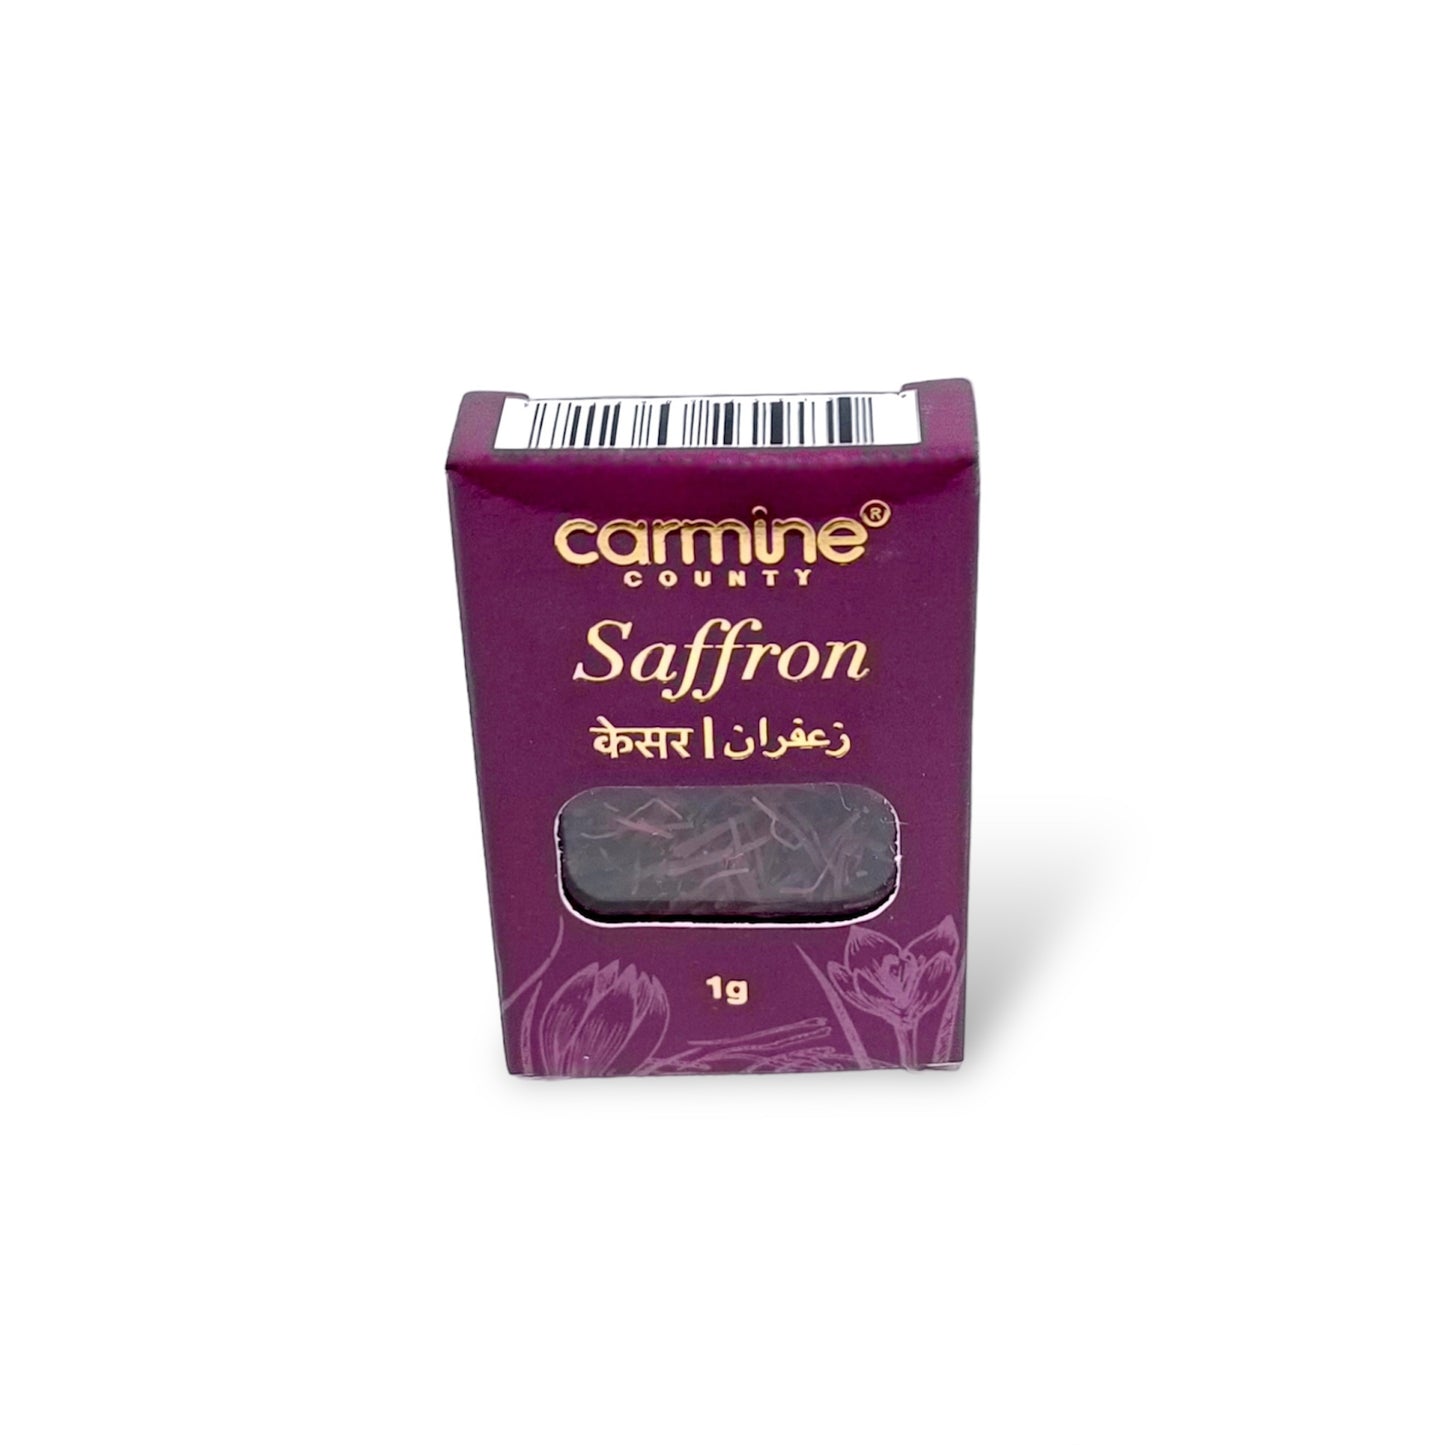 Carmine County Pure and Natural Saffron Threads 1g, Economy Pack